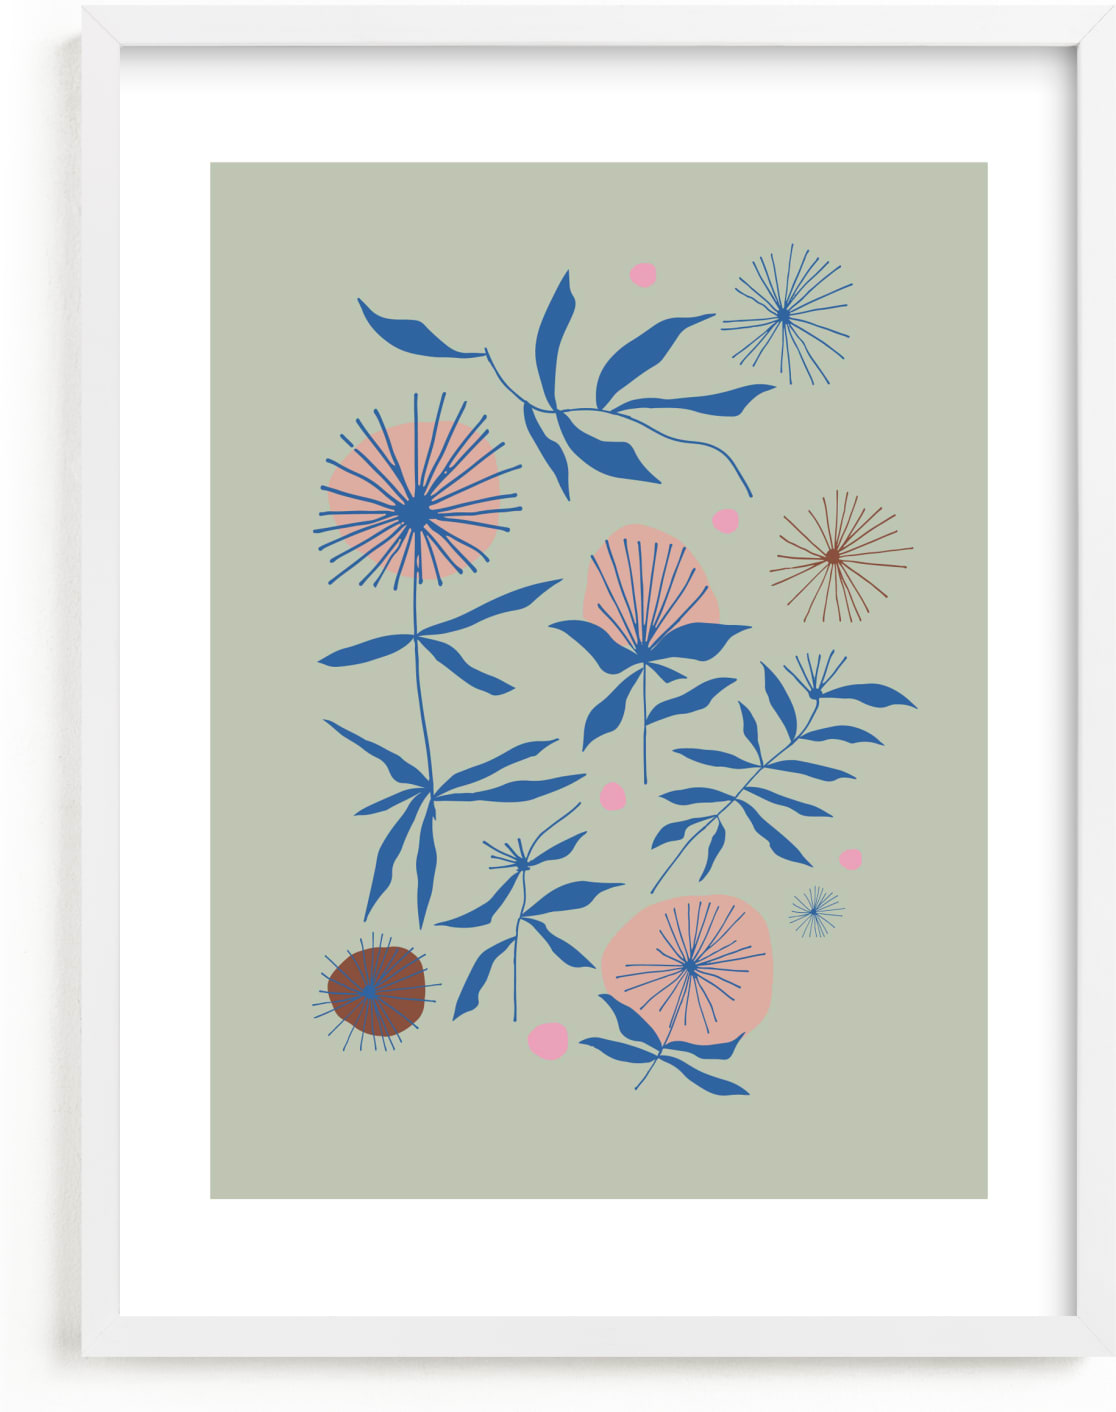 This is a blue kids wall art by Kate Capone called Vintage Floral Set I.